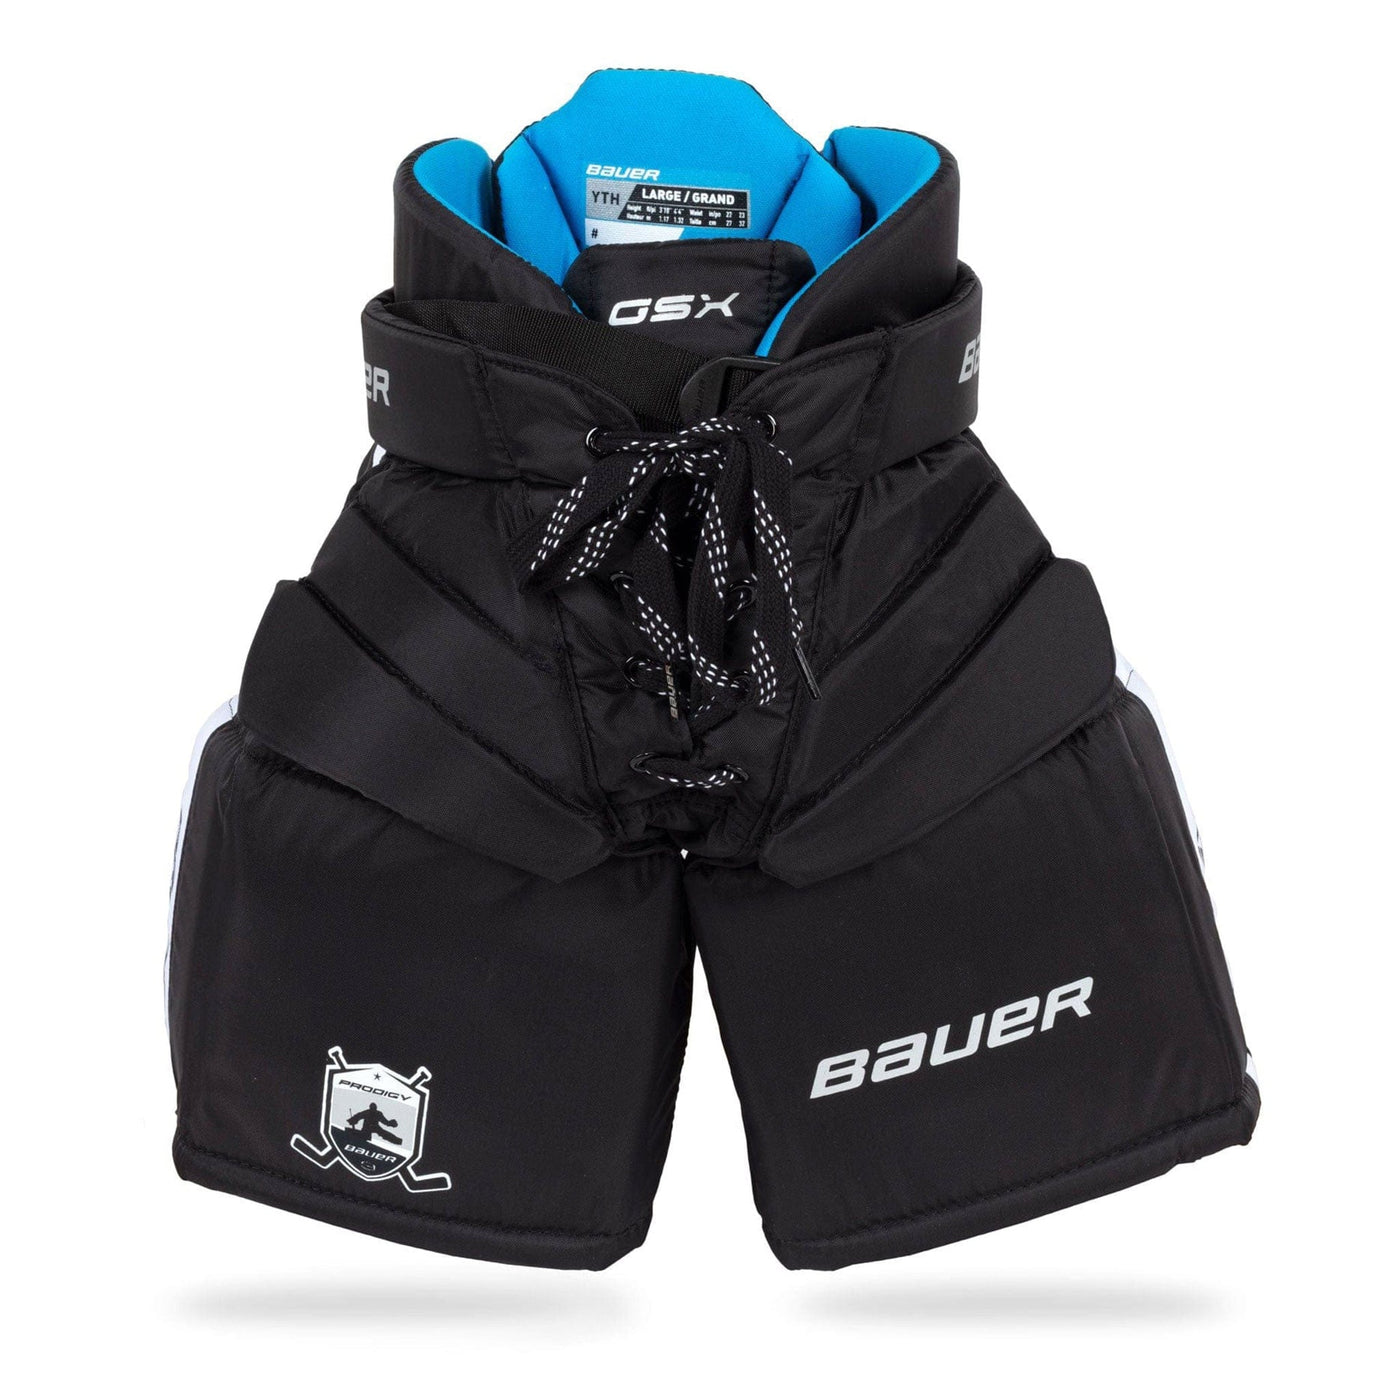 Bauer GSX Prodigy Youth Goalie Pants S20 - The Hockey Shop Source For Sports